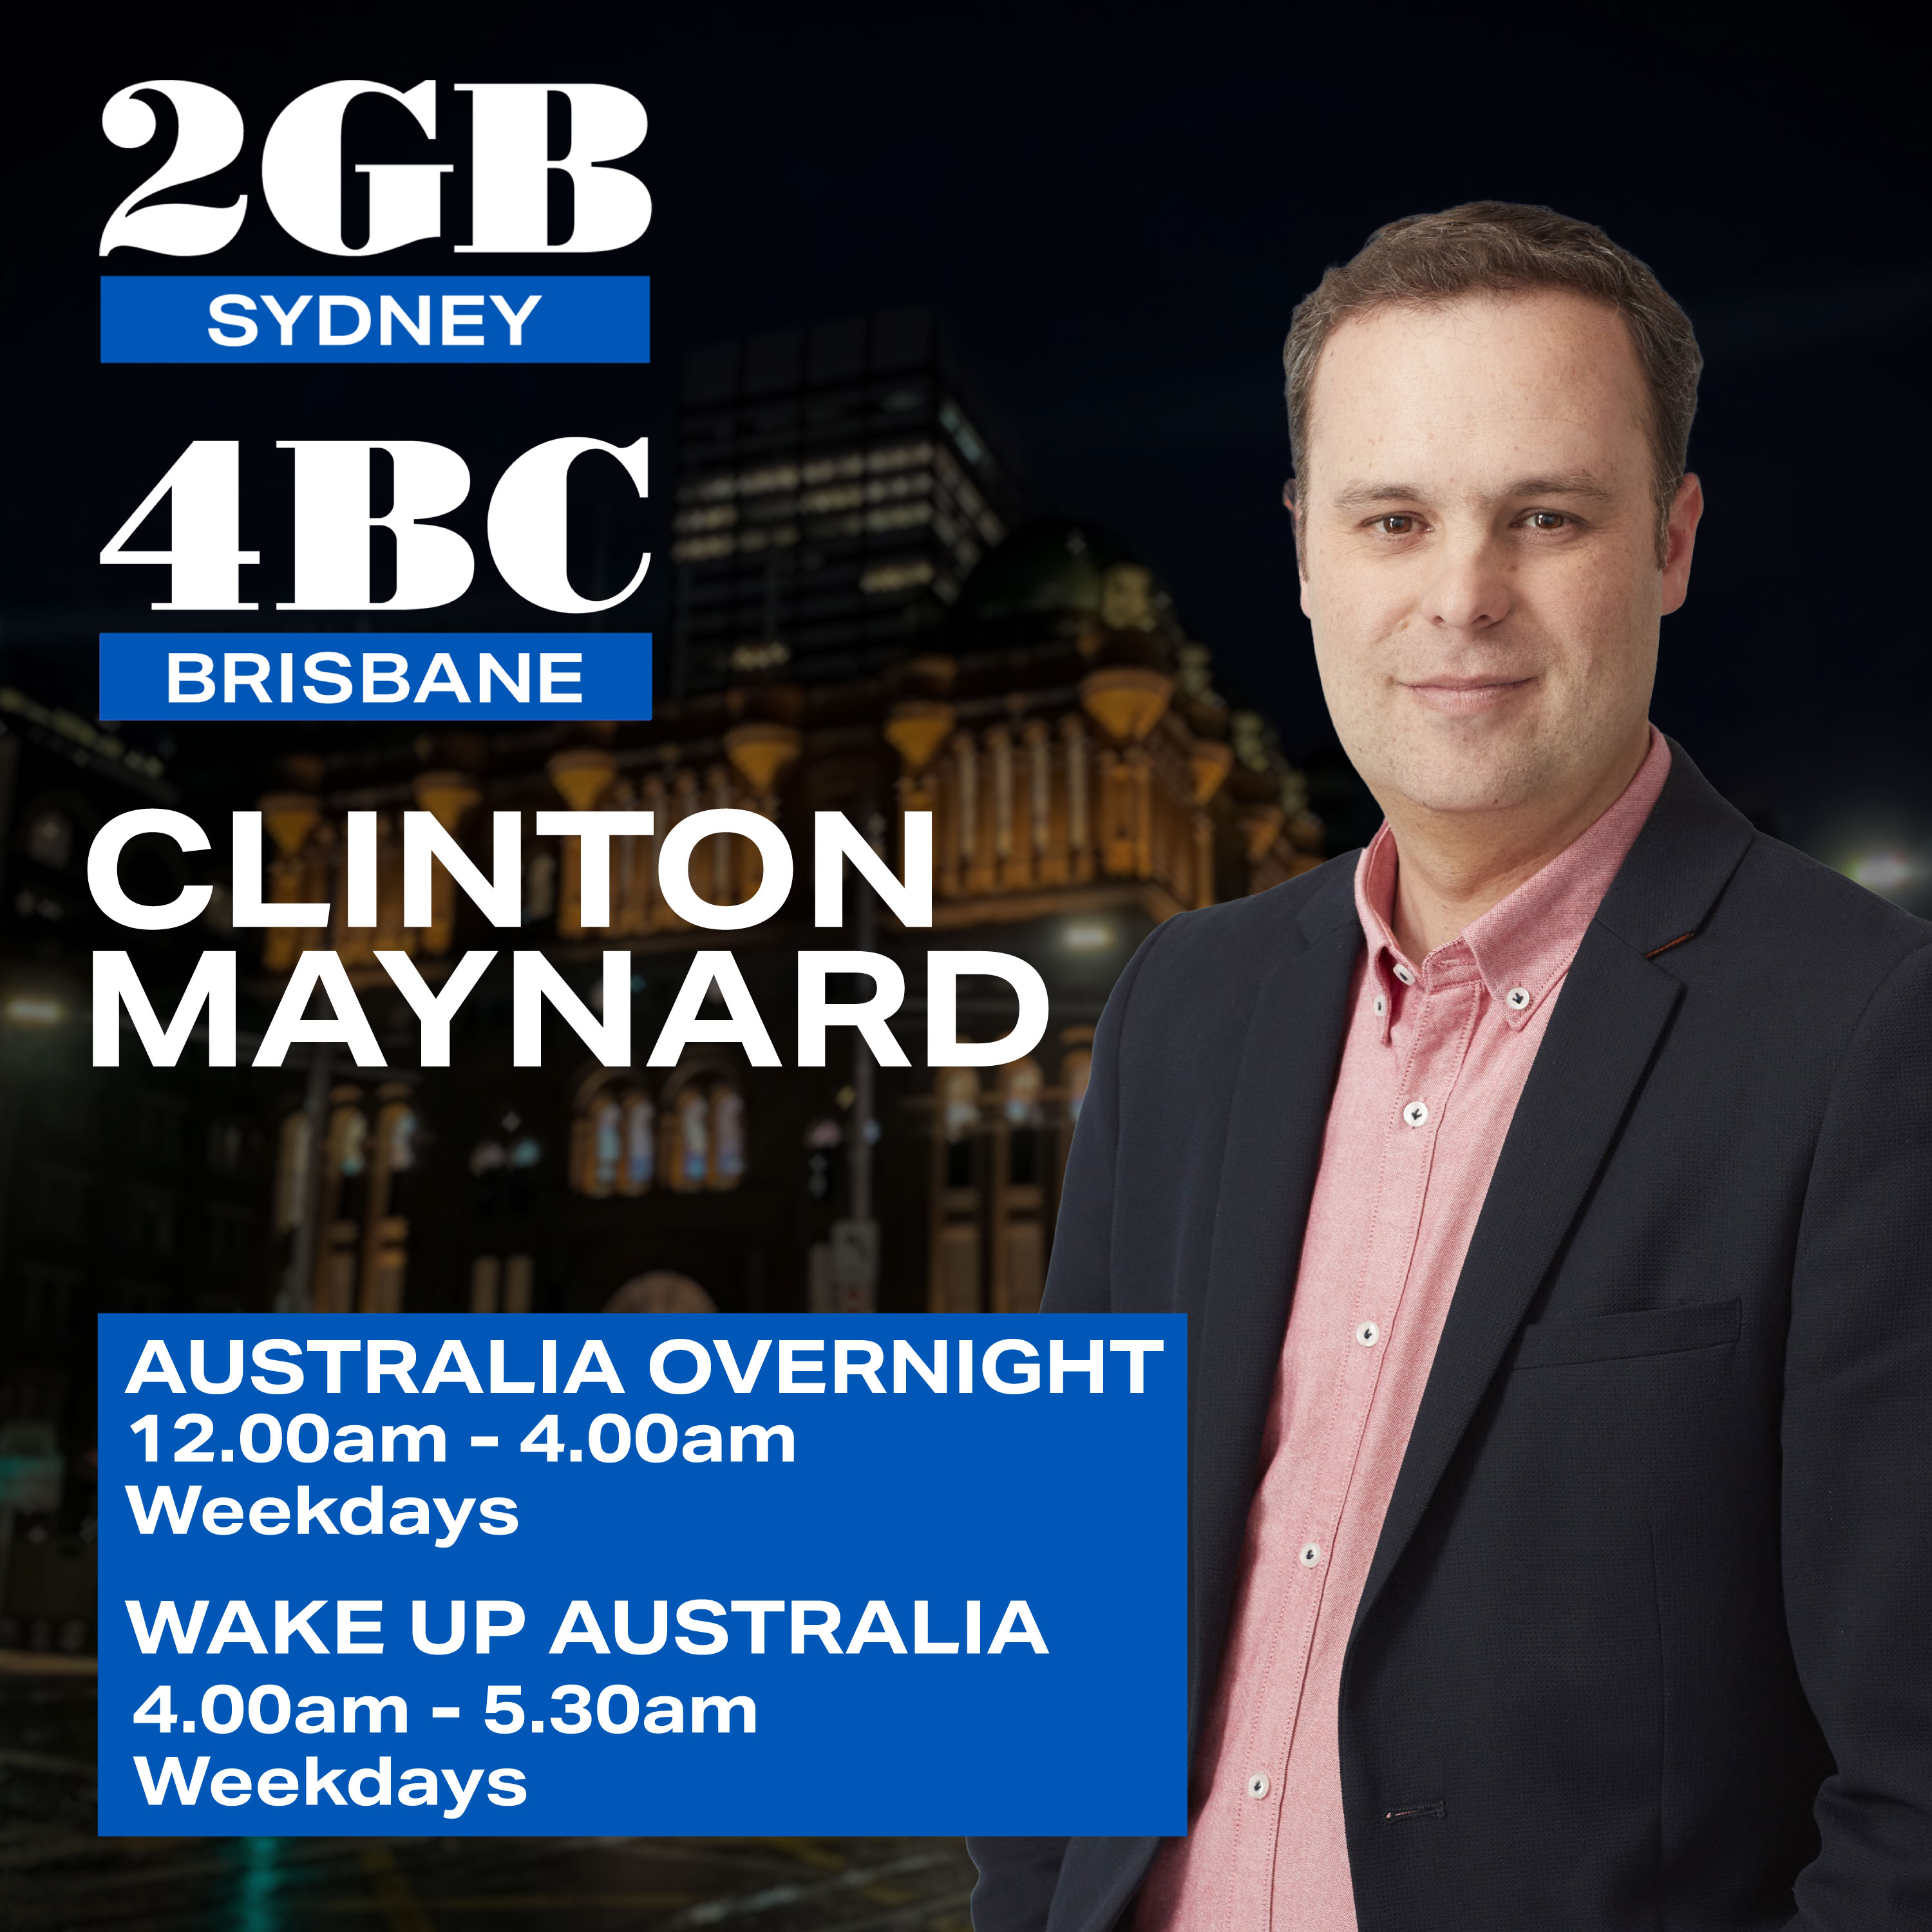 Overnights with Clinton Maynard - Friday 21st of June